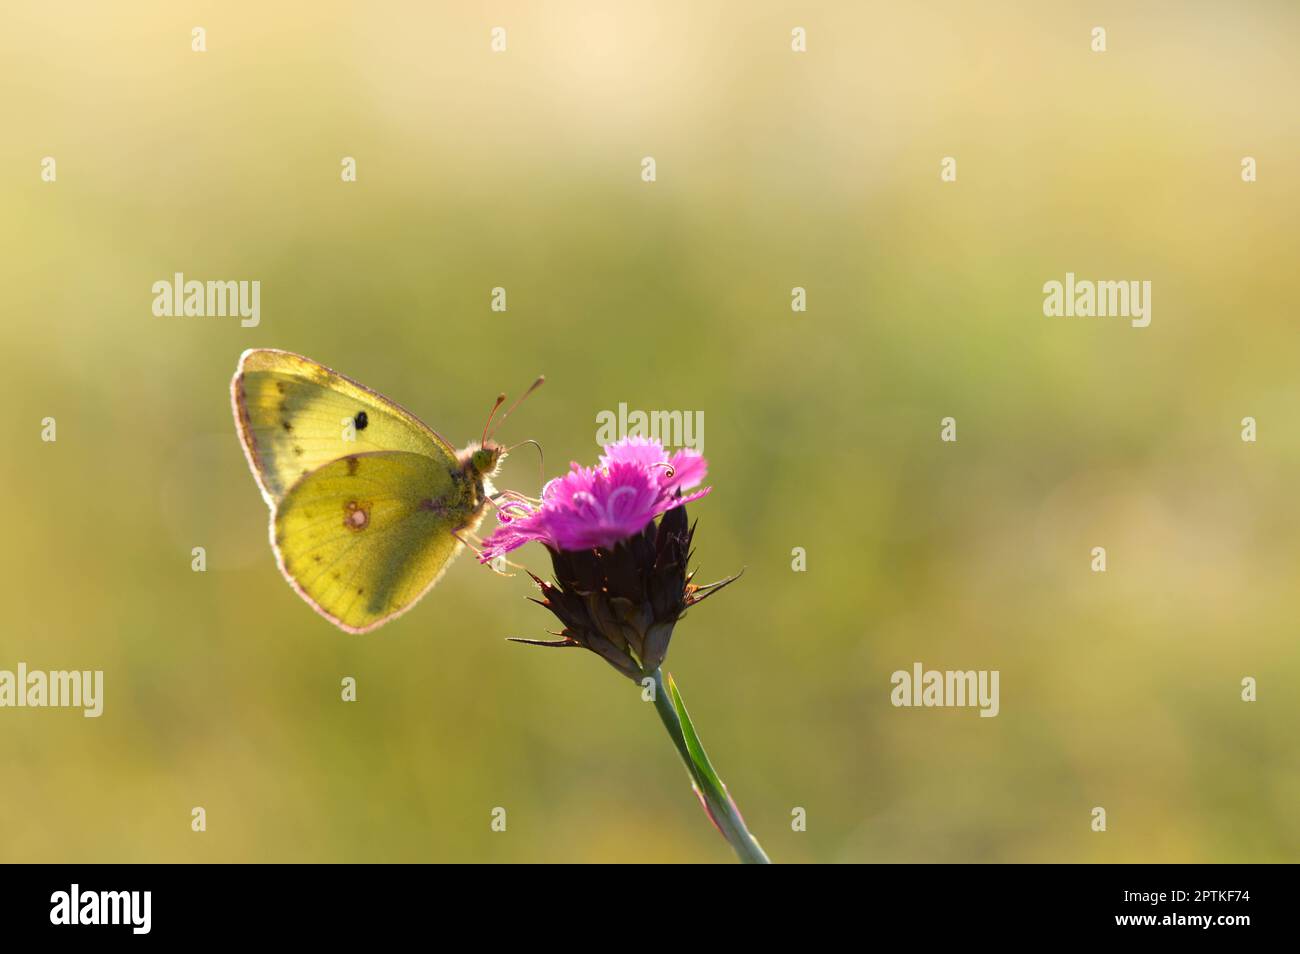 Clouded yellows, yellow butterfly on a flower in nature macro. Green natural background. Side view, closed wings. Stock Photo